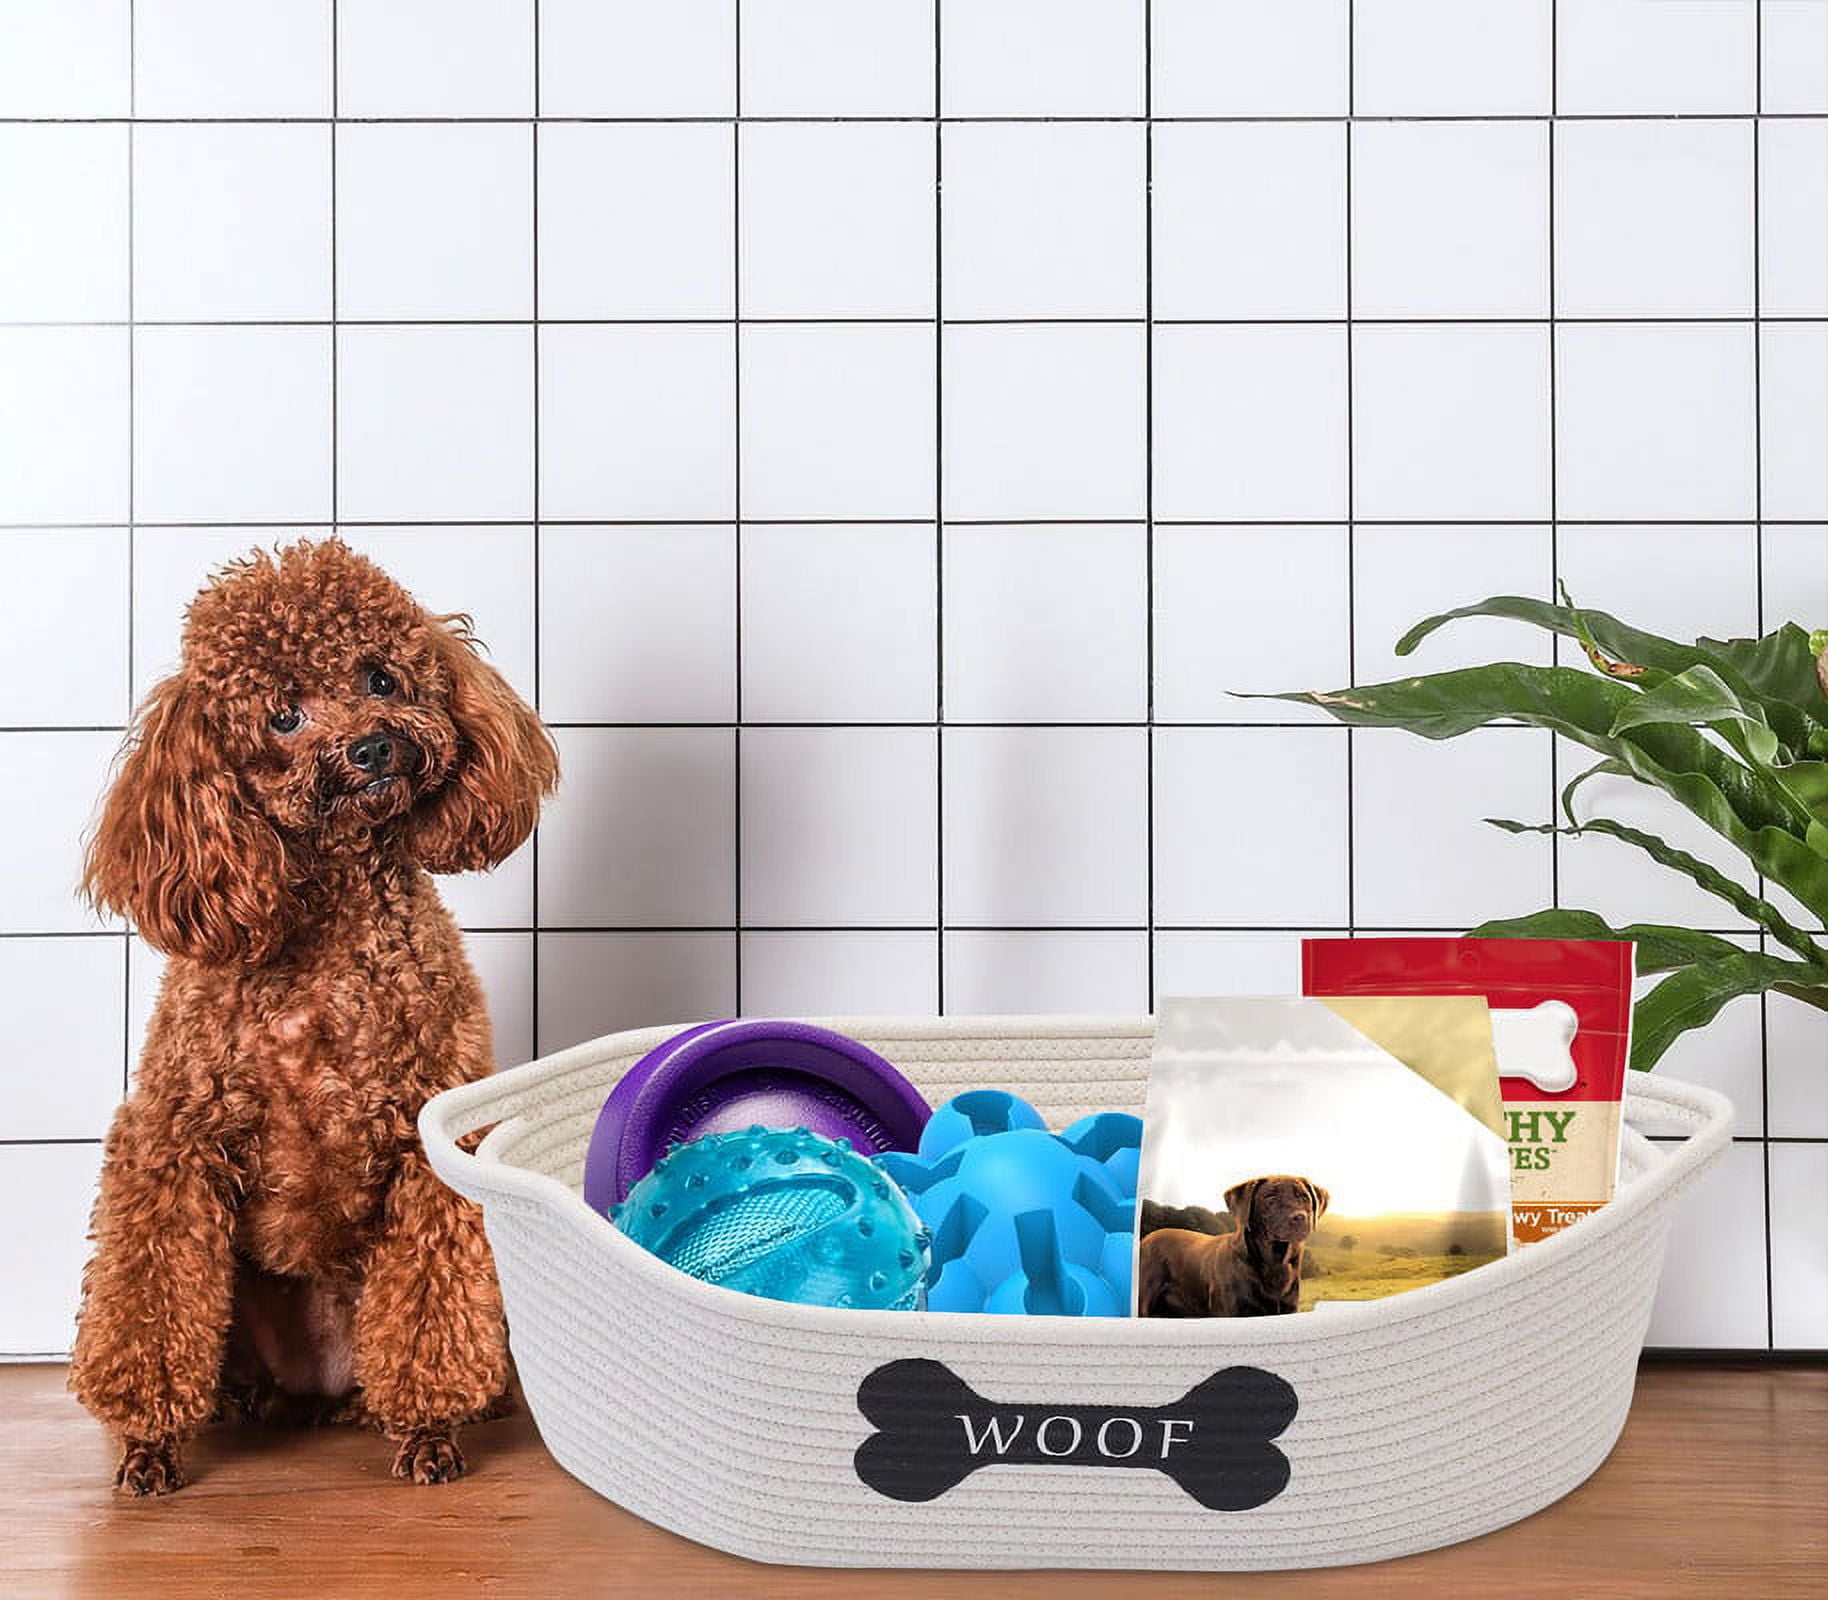 KWLET Small Basket Storage Baskets Bins Shelf Baskets Book Baskets Felt Storage Bin White Baskets for Organizing Toys Pet Toys Dippers Towels Toilet C